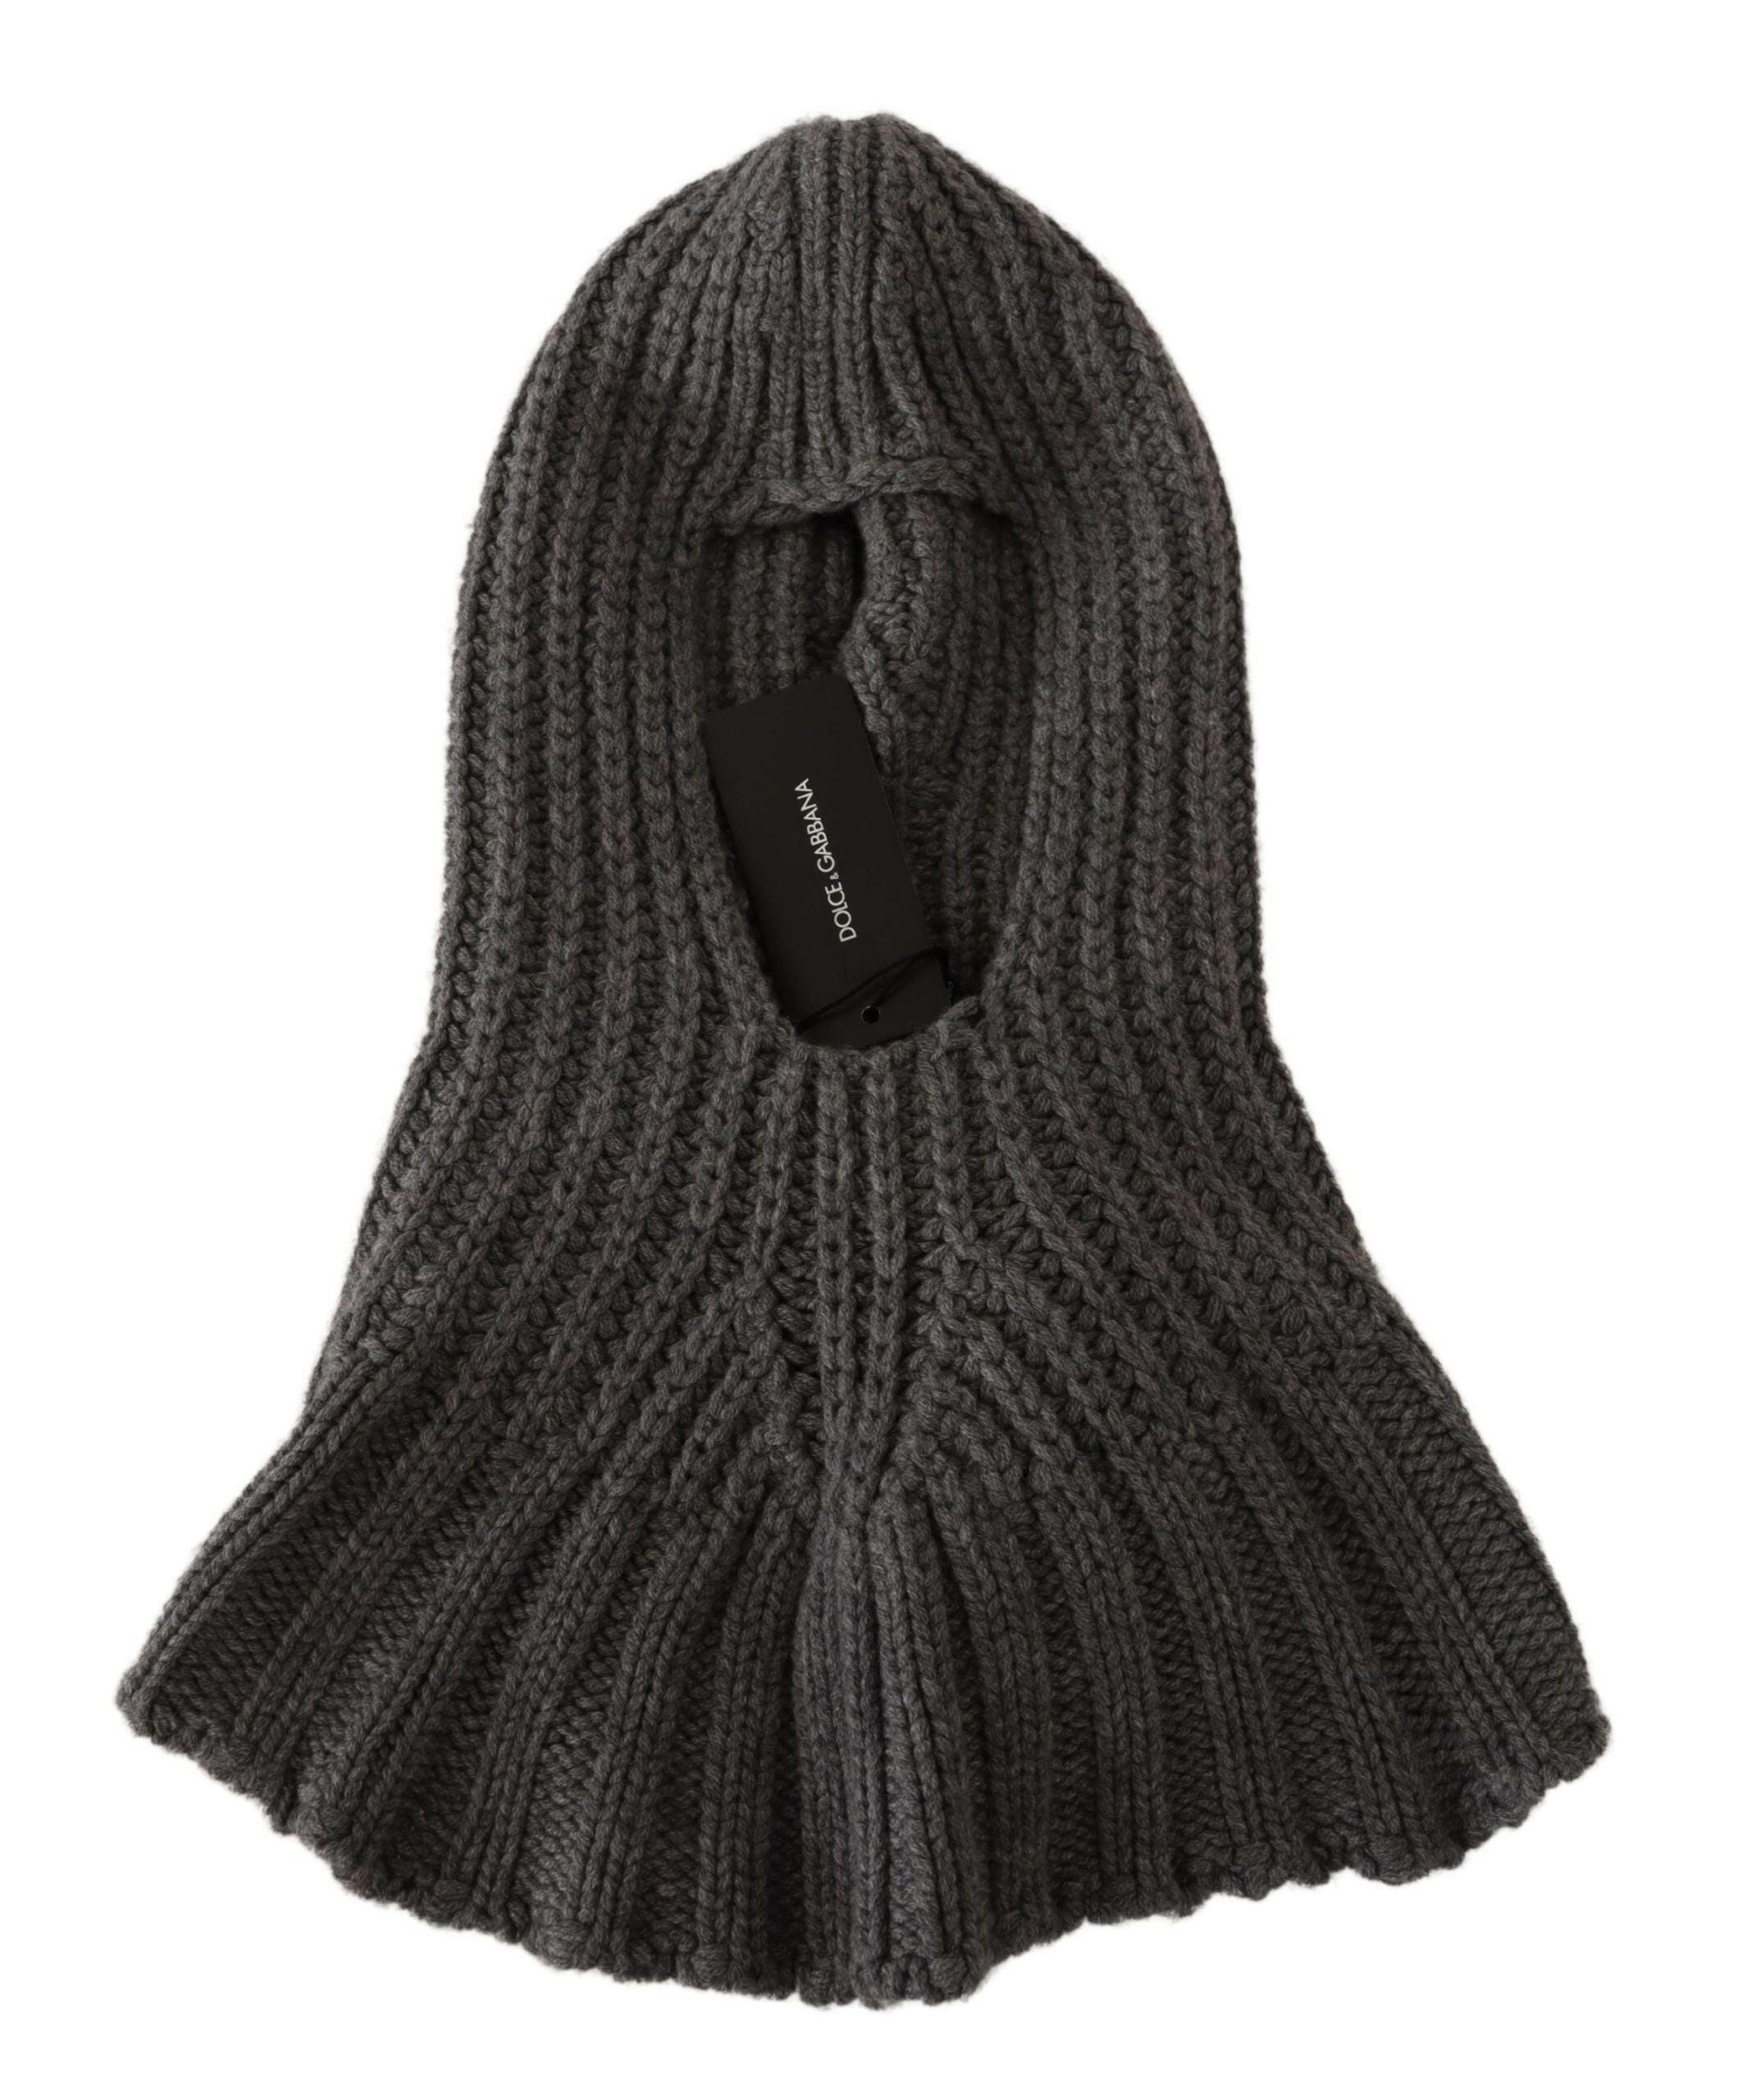 Dolce & Gabbana Gray 100% Cashmere Knitted Wrap One Size Scarf - GENUINE AUTHENTIC BRAND LLC  